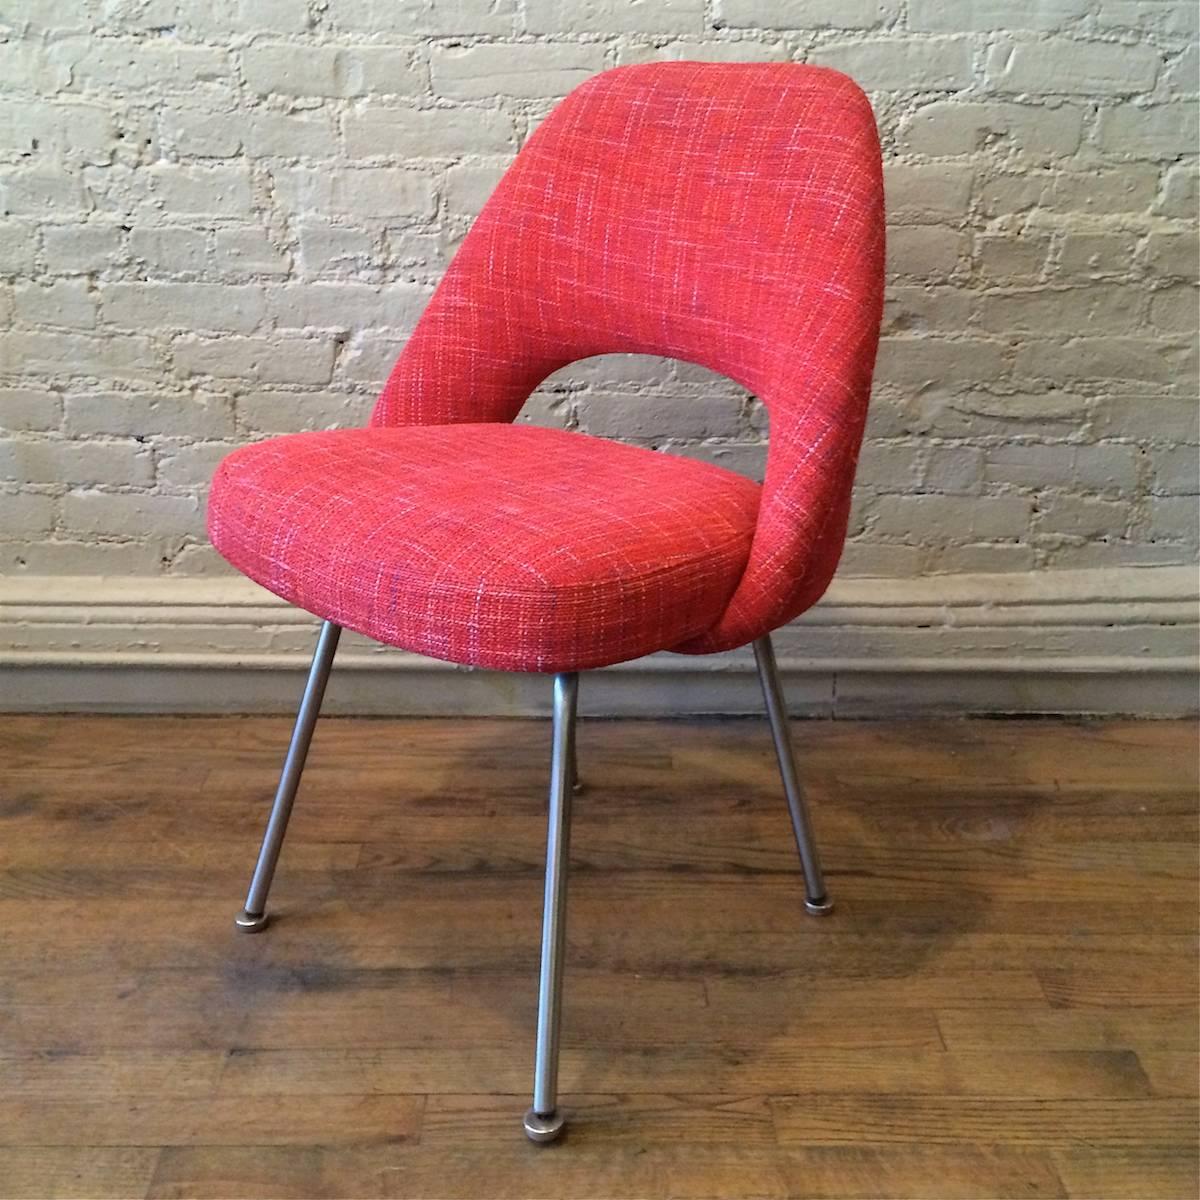 Executive side chair by Eero Saarinen for Knoll with chrome legs is newly upholstered in a raspberry tweed